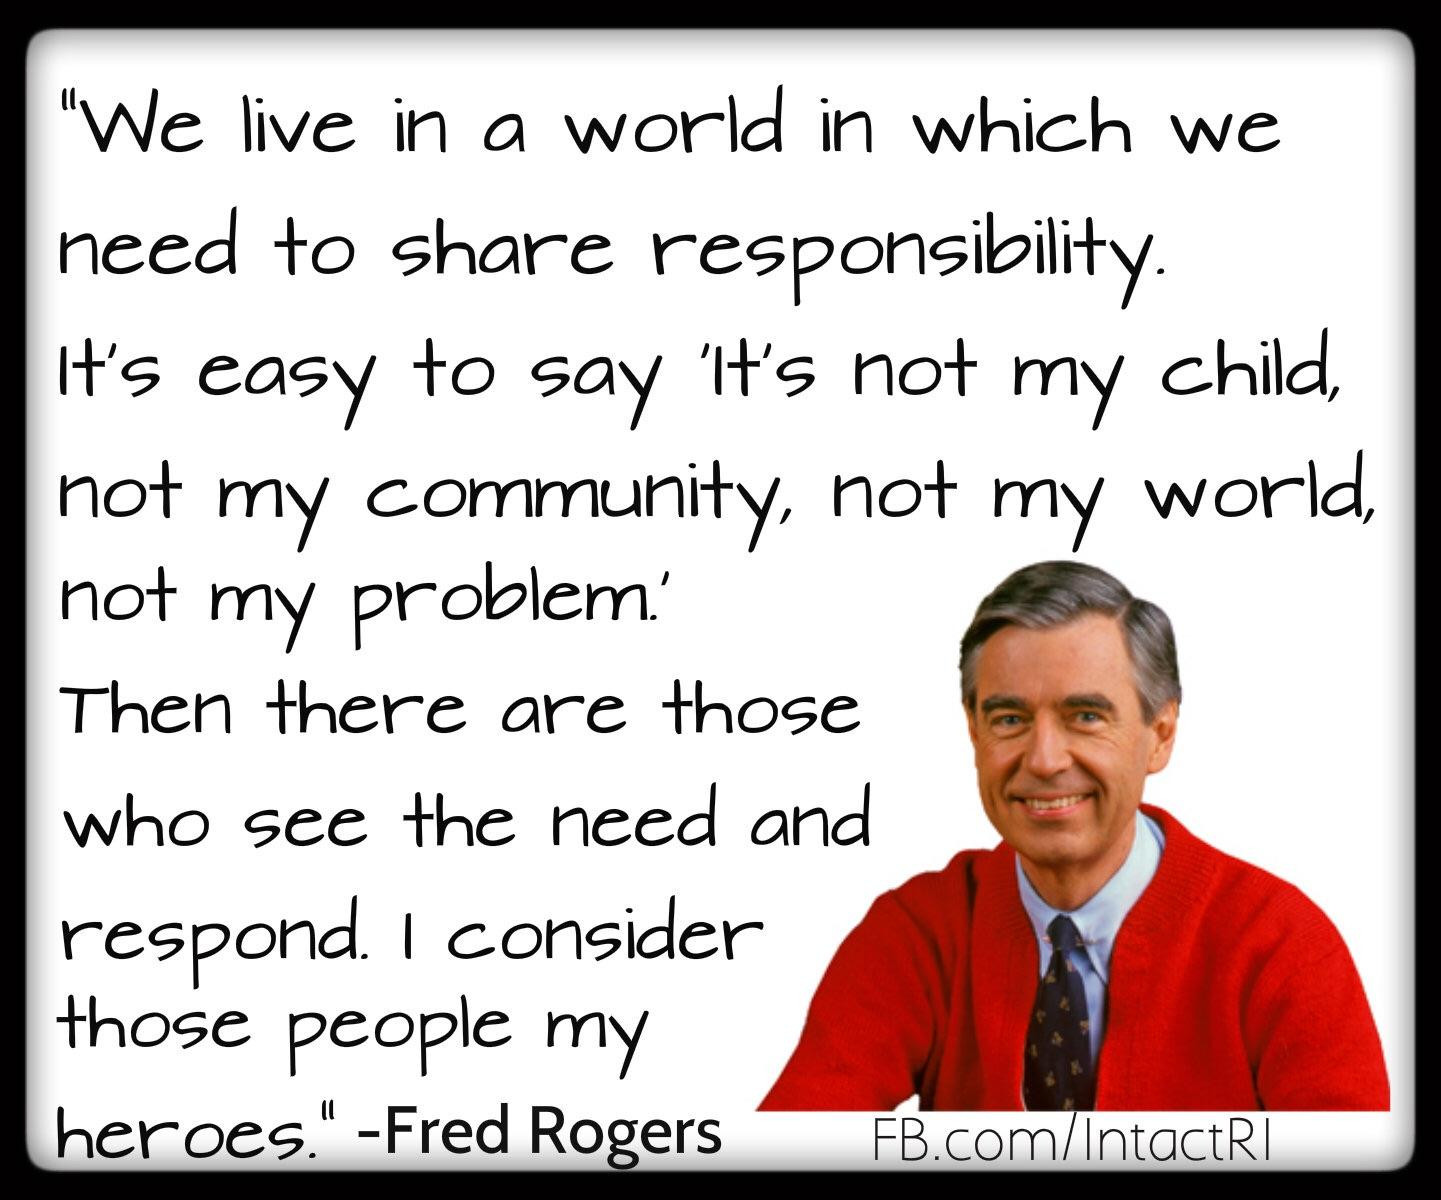 Protecting Children Quotes
 Love this quote We have a shared responsibility to